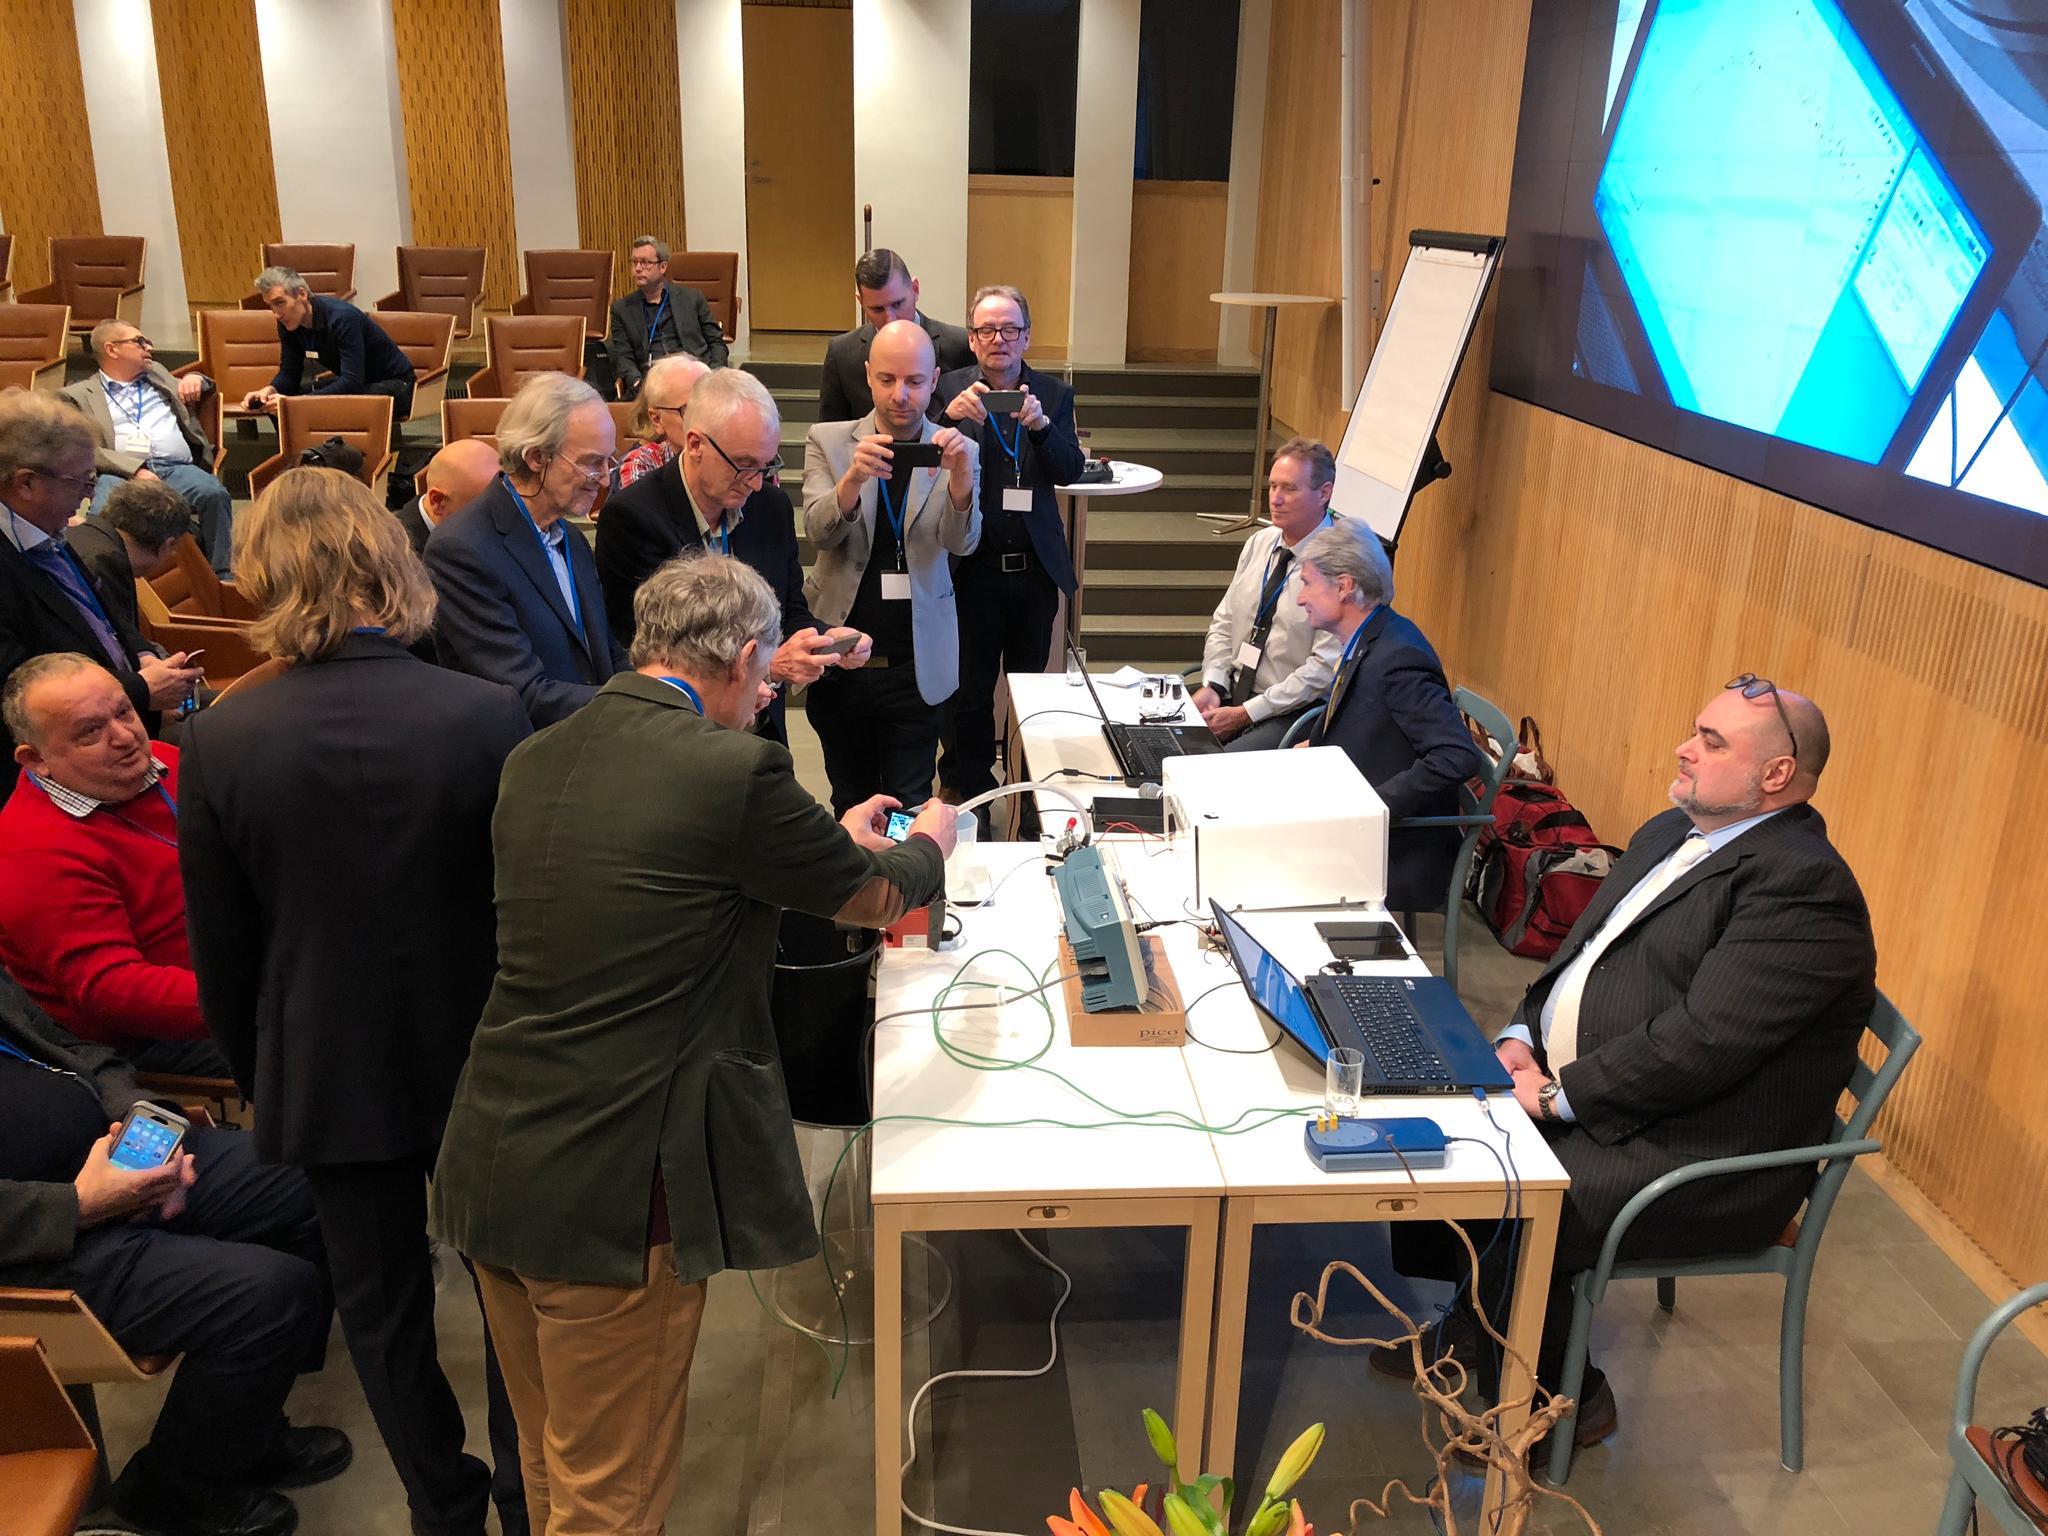 About 70 investors, researchers and other interested people met in Stockholm to see the demonstration of the mysterious energy source.